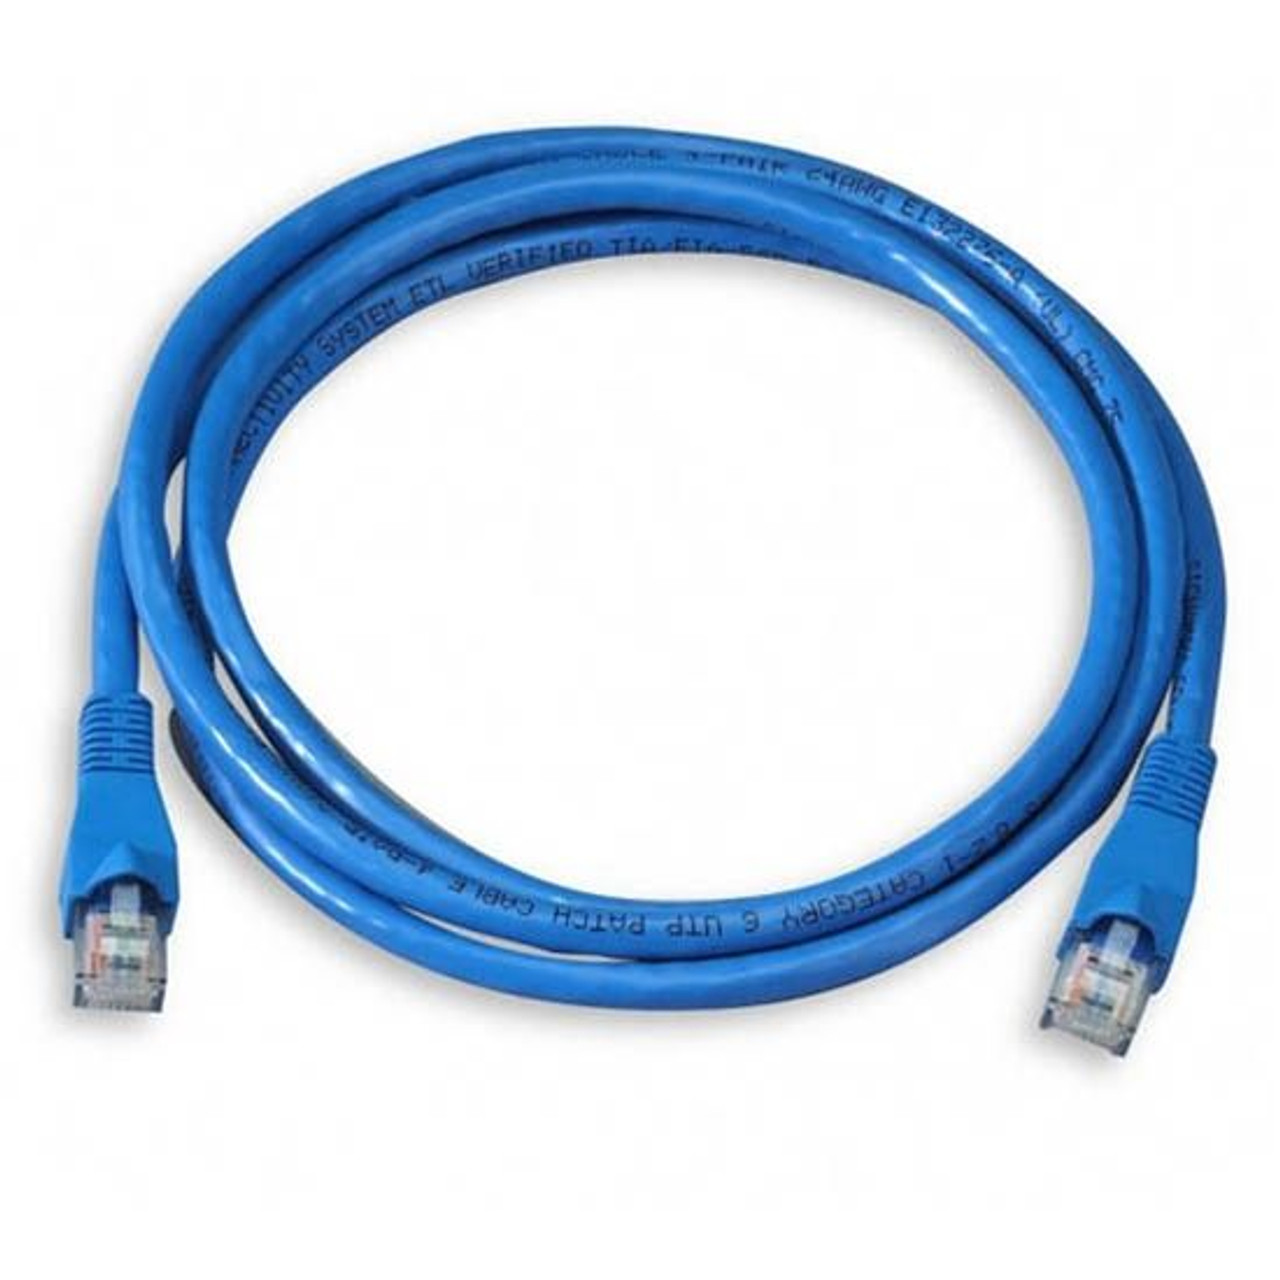 Eagle 50' FT CAT5e Patch Cord Copper Cable Blue Molded Snagless Boot 350 MHz RJ45 UTP Network Patch 24 AWG Copper Stranded Male to Male RJ-45 Enhanced Category 5e High Speed Ethernet Data Computer Jumper